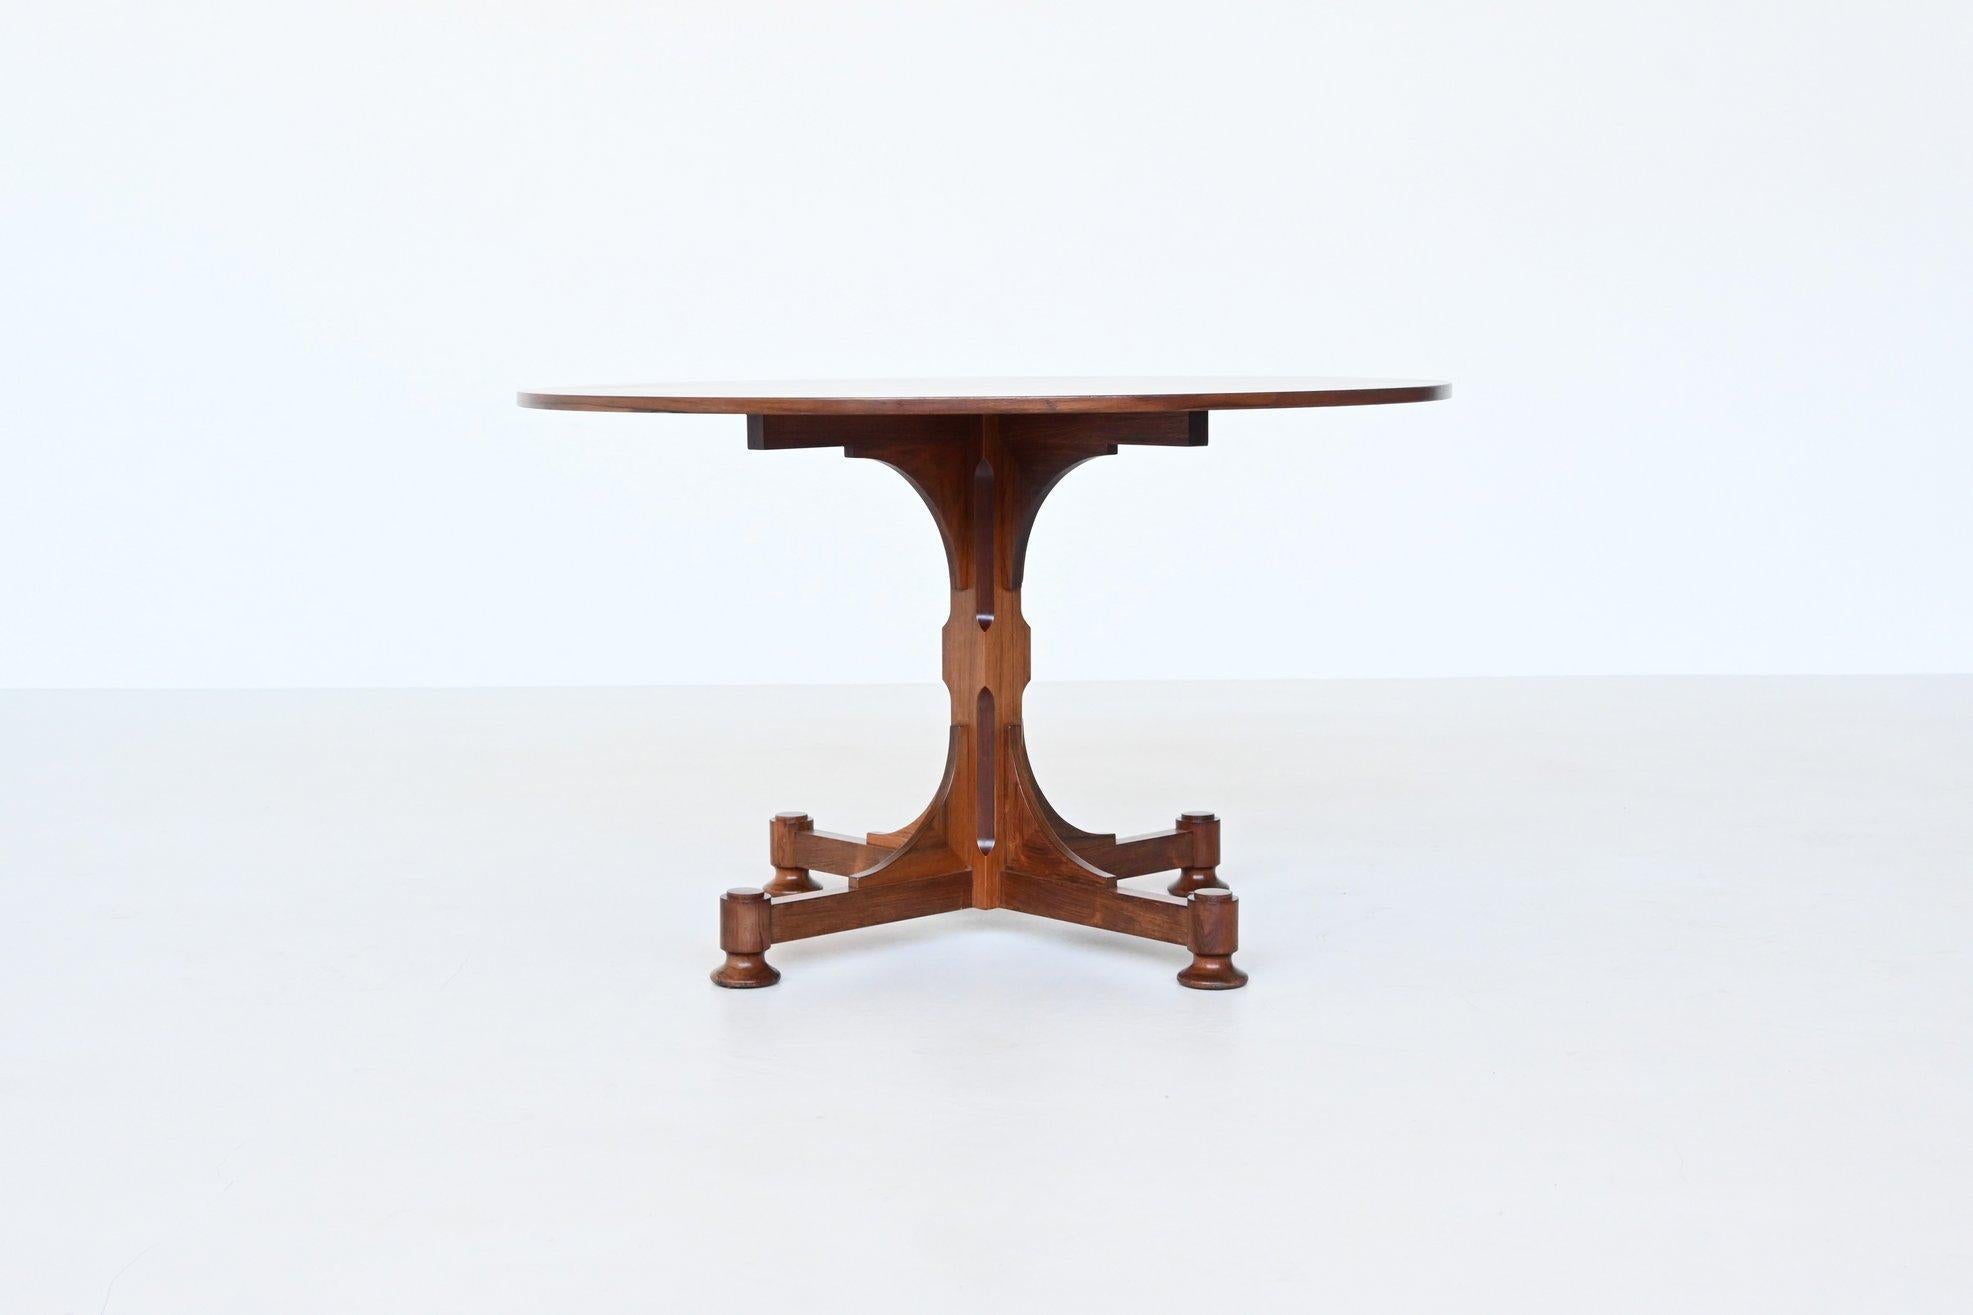 Amazing Art Deco style dining table by unknown designer or manufacturer, Italy 1960. This wonderful unique table featuring a round shaped top which is supported by a sculptural pedestal. The rosewood veneered top shows a beautiful flamed grain to